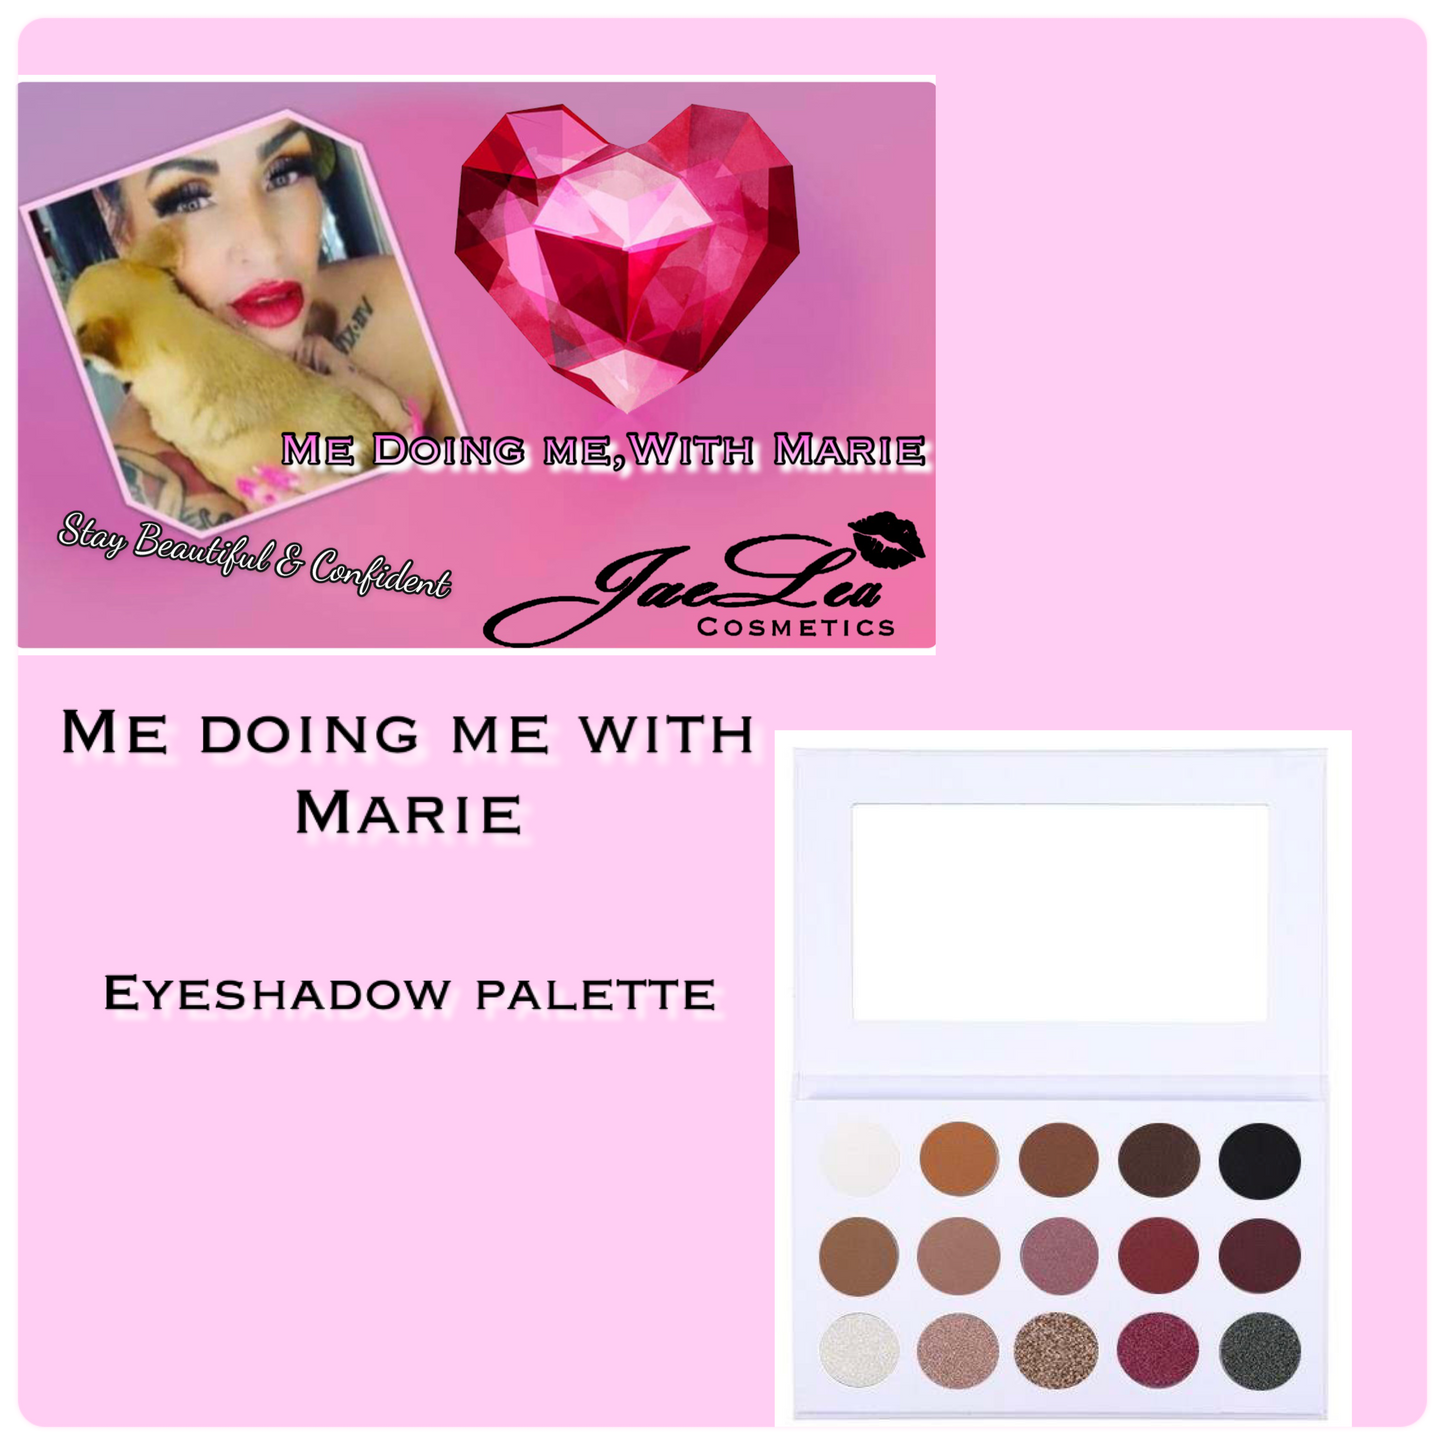 Me Doing Me With Marie eyeshadow palette